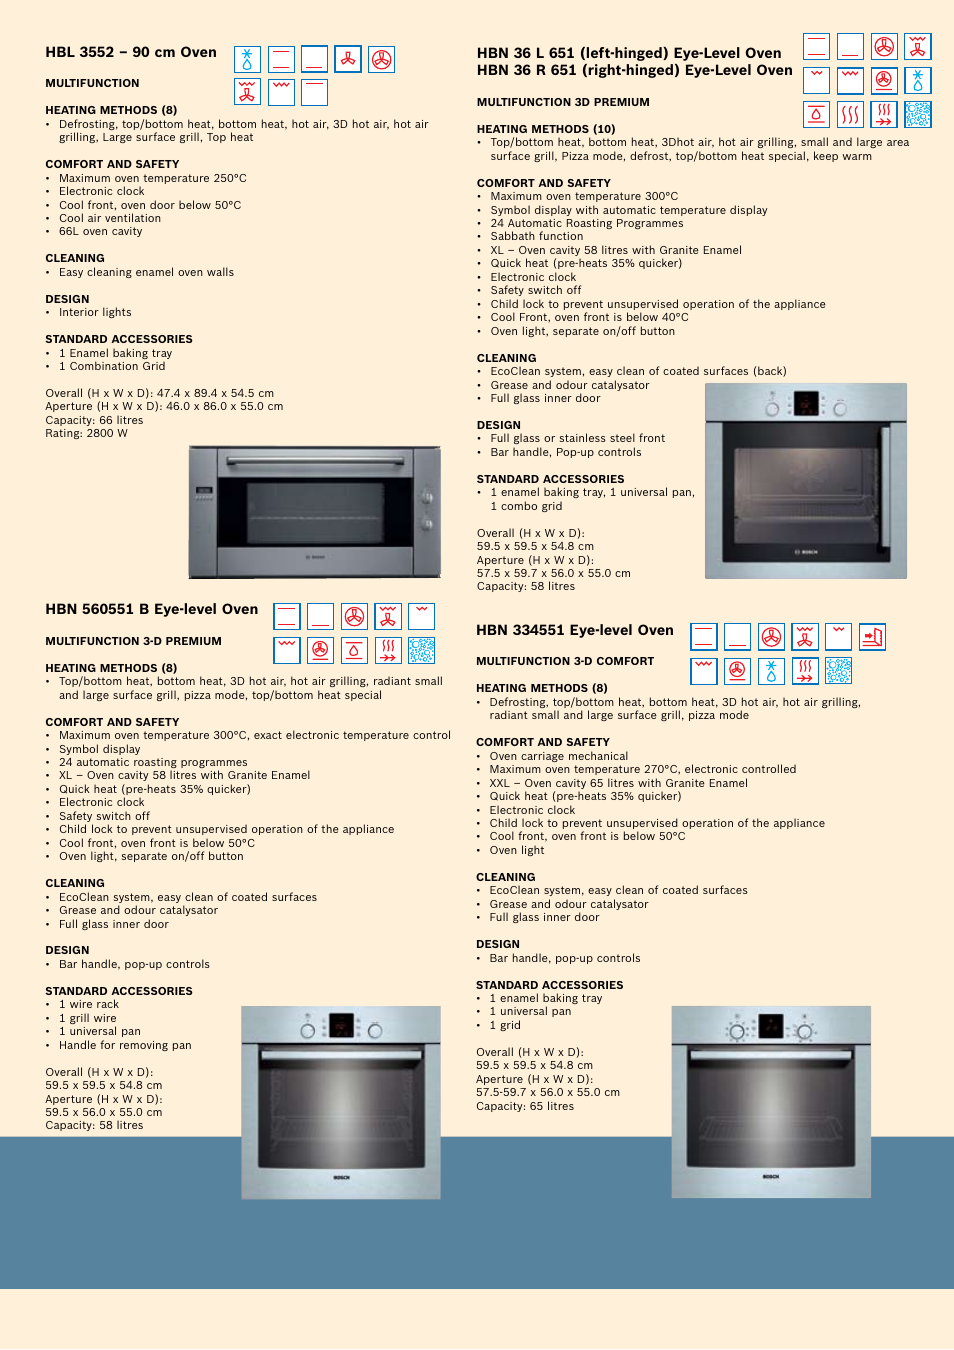 do not do Engage wound Bosch Oven Carriage User Manual | Page 5 / 28 | Original mode